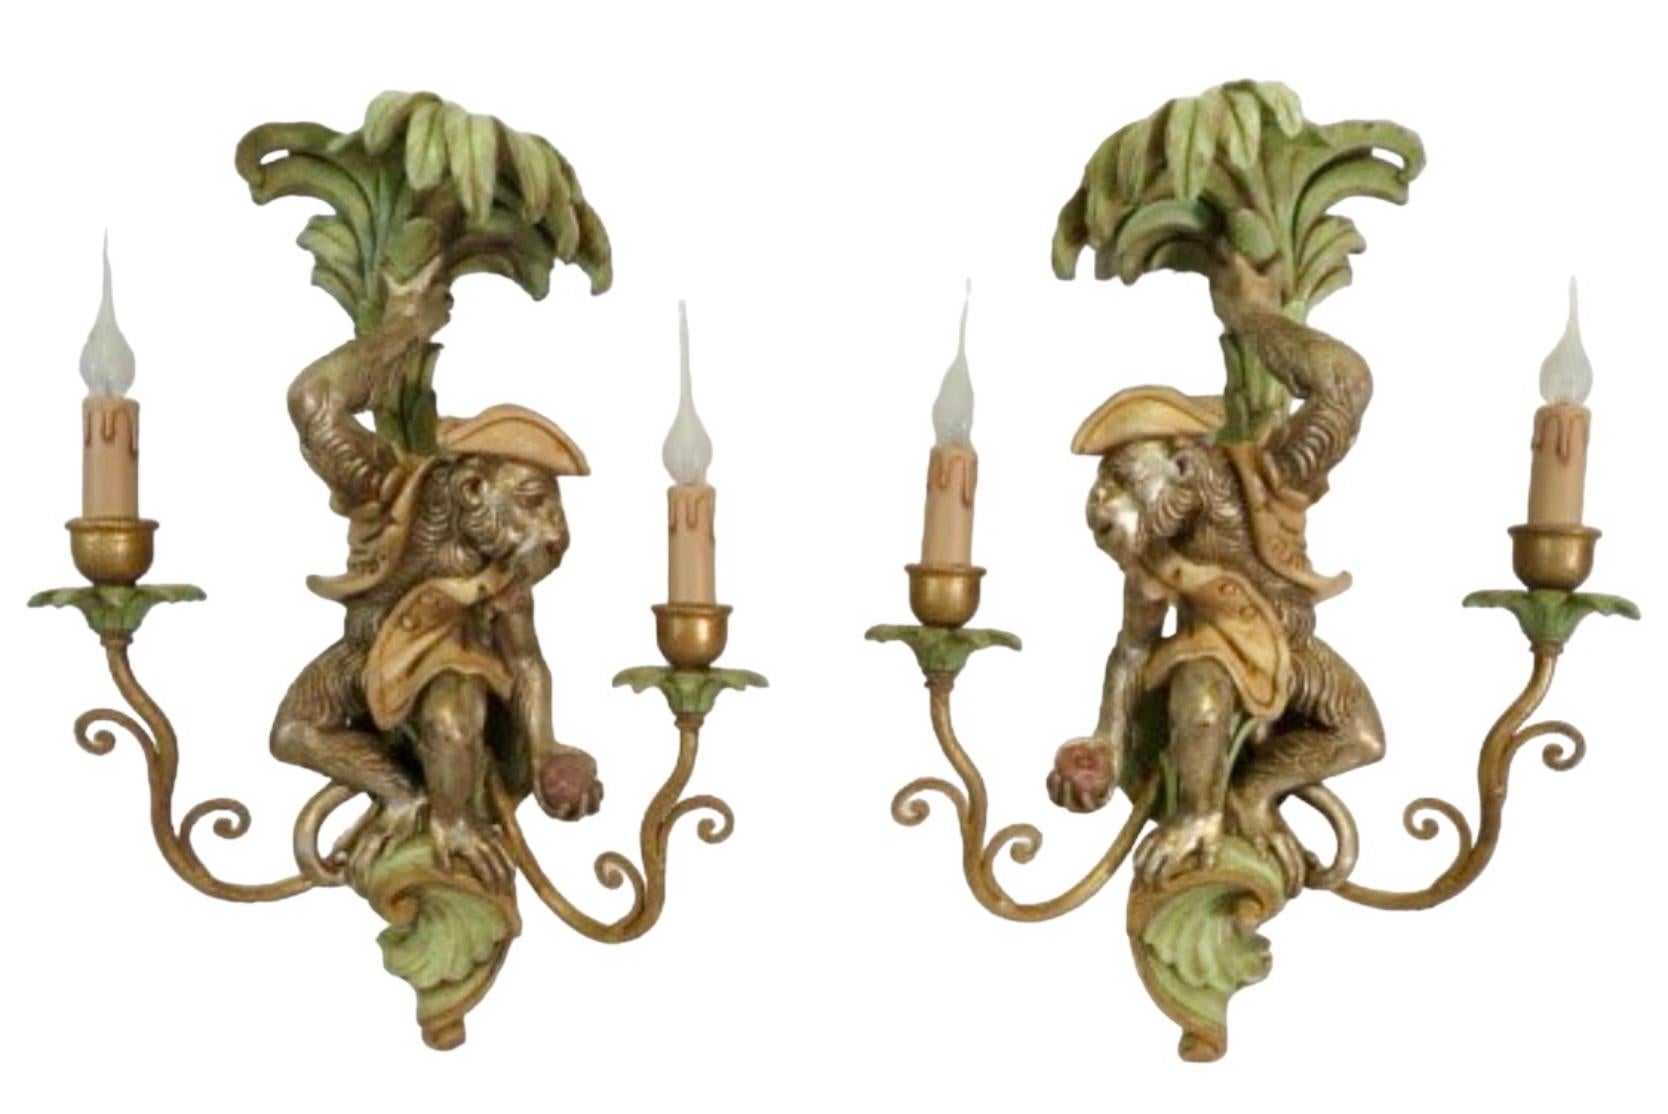 Decorative Crafts Italian Regency Style Carved Wood Monkey Palm Tree Sconces -2 For Sale 2